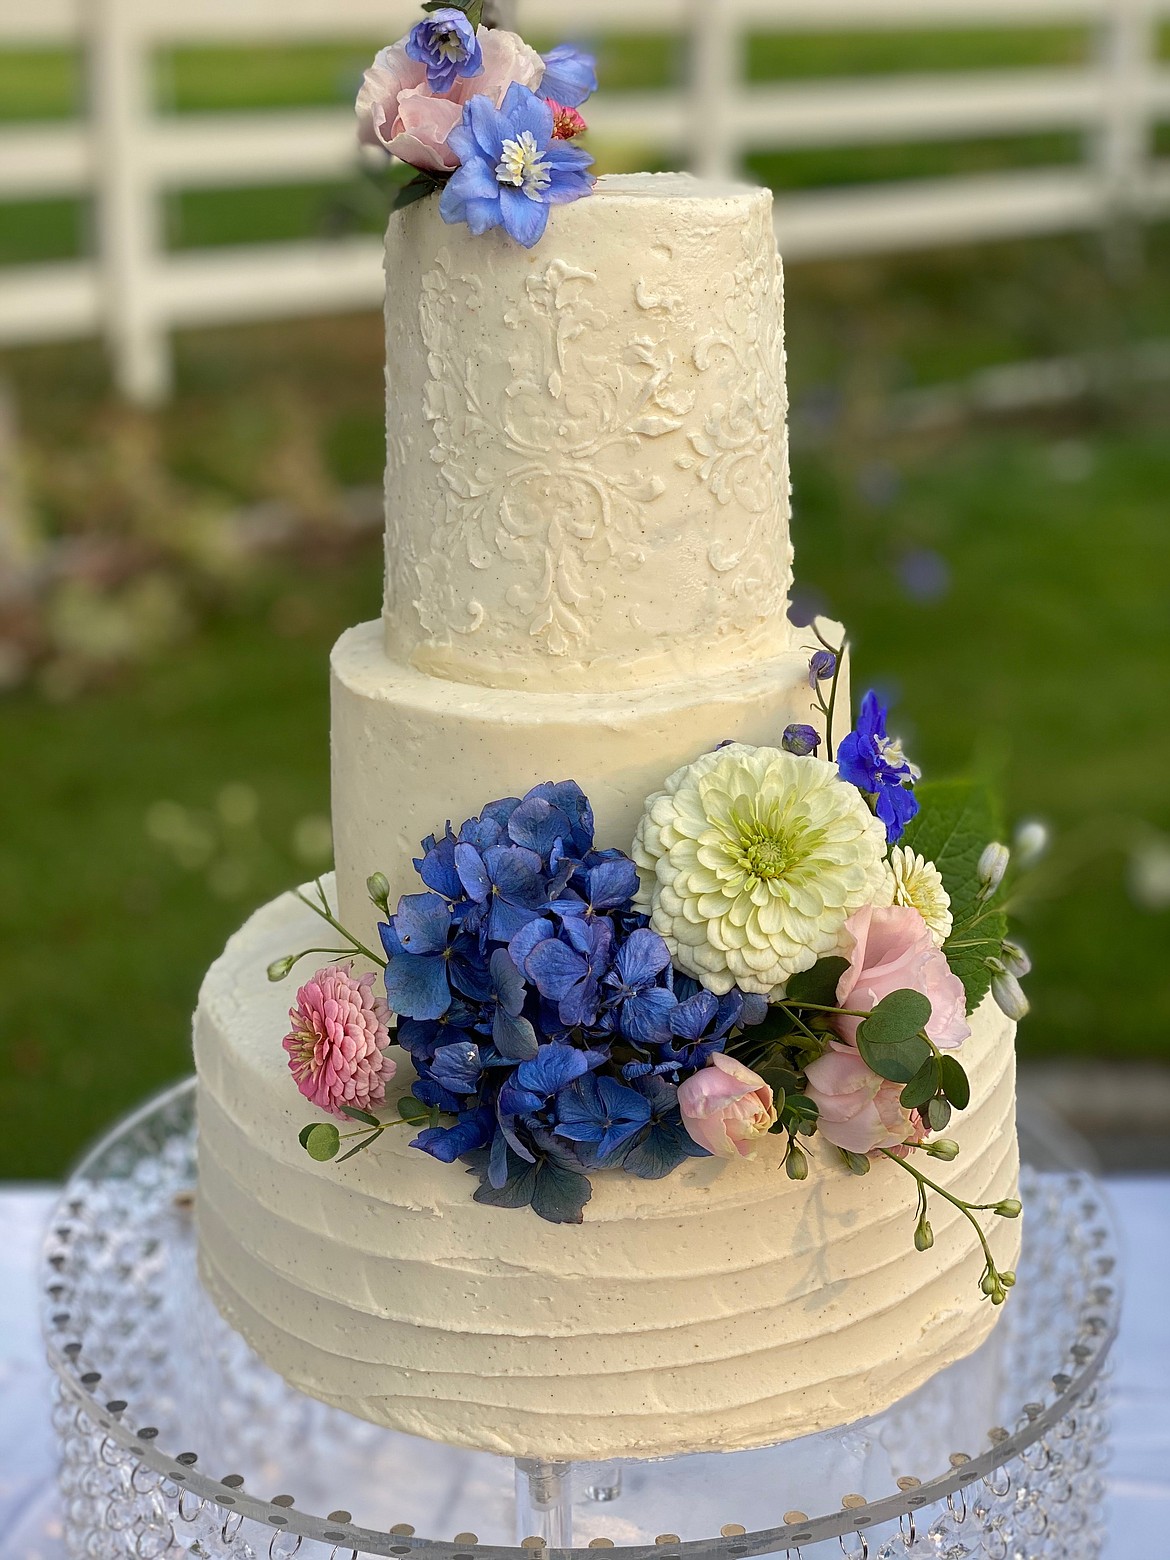 Wedding cake created by Paige Tolley for her business Paige's Custom Cakes. Tolley said so far, it's her favorite make.